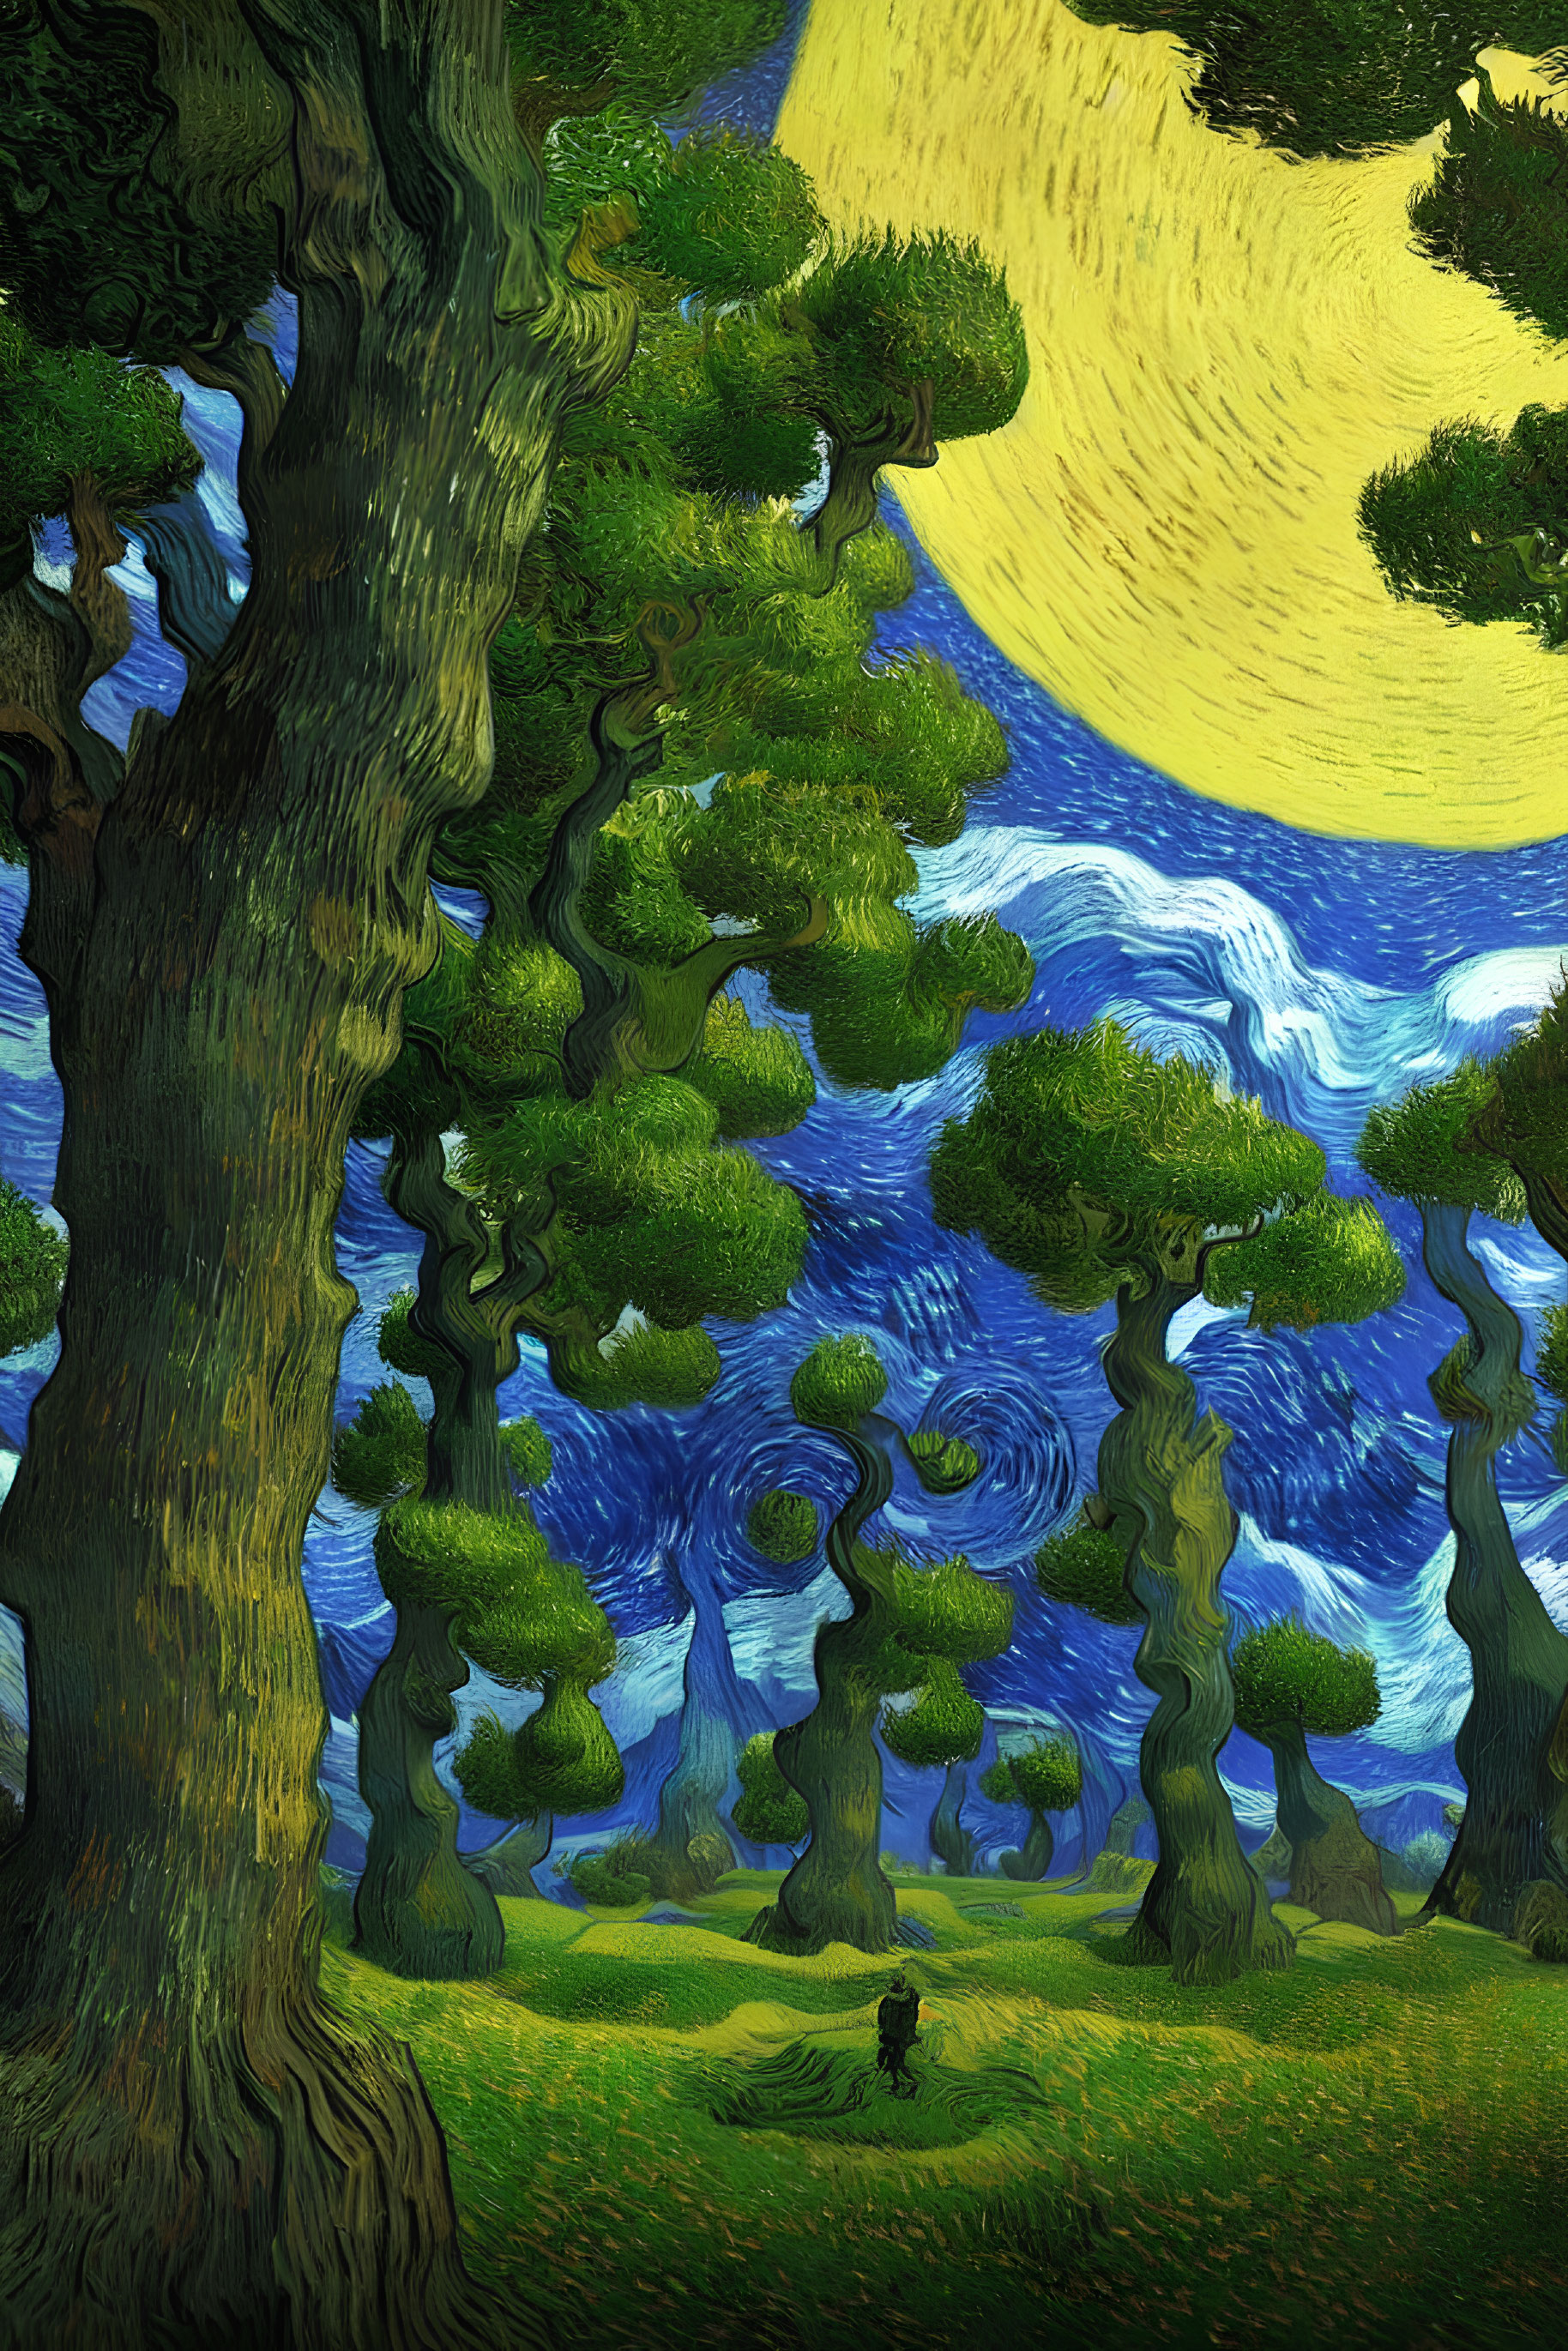 Night sky painting with moon, swirling clouds, and stylized trees.